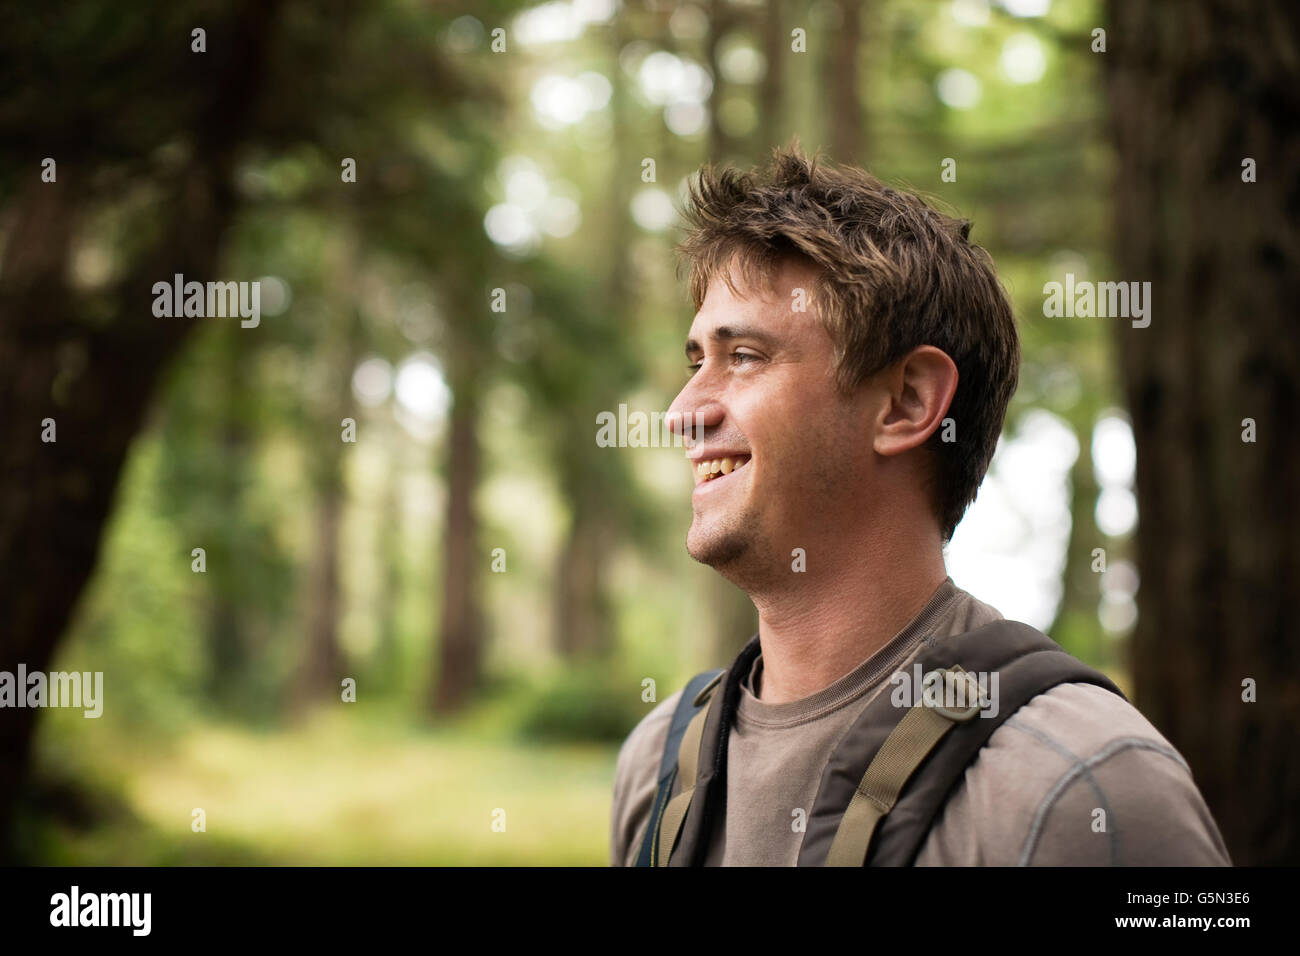 Caucasian man smiling in forest Stock Photo